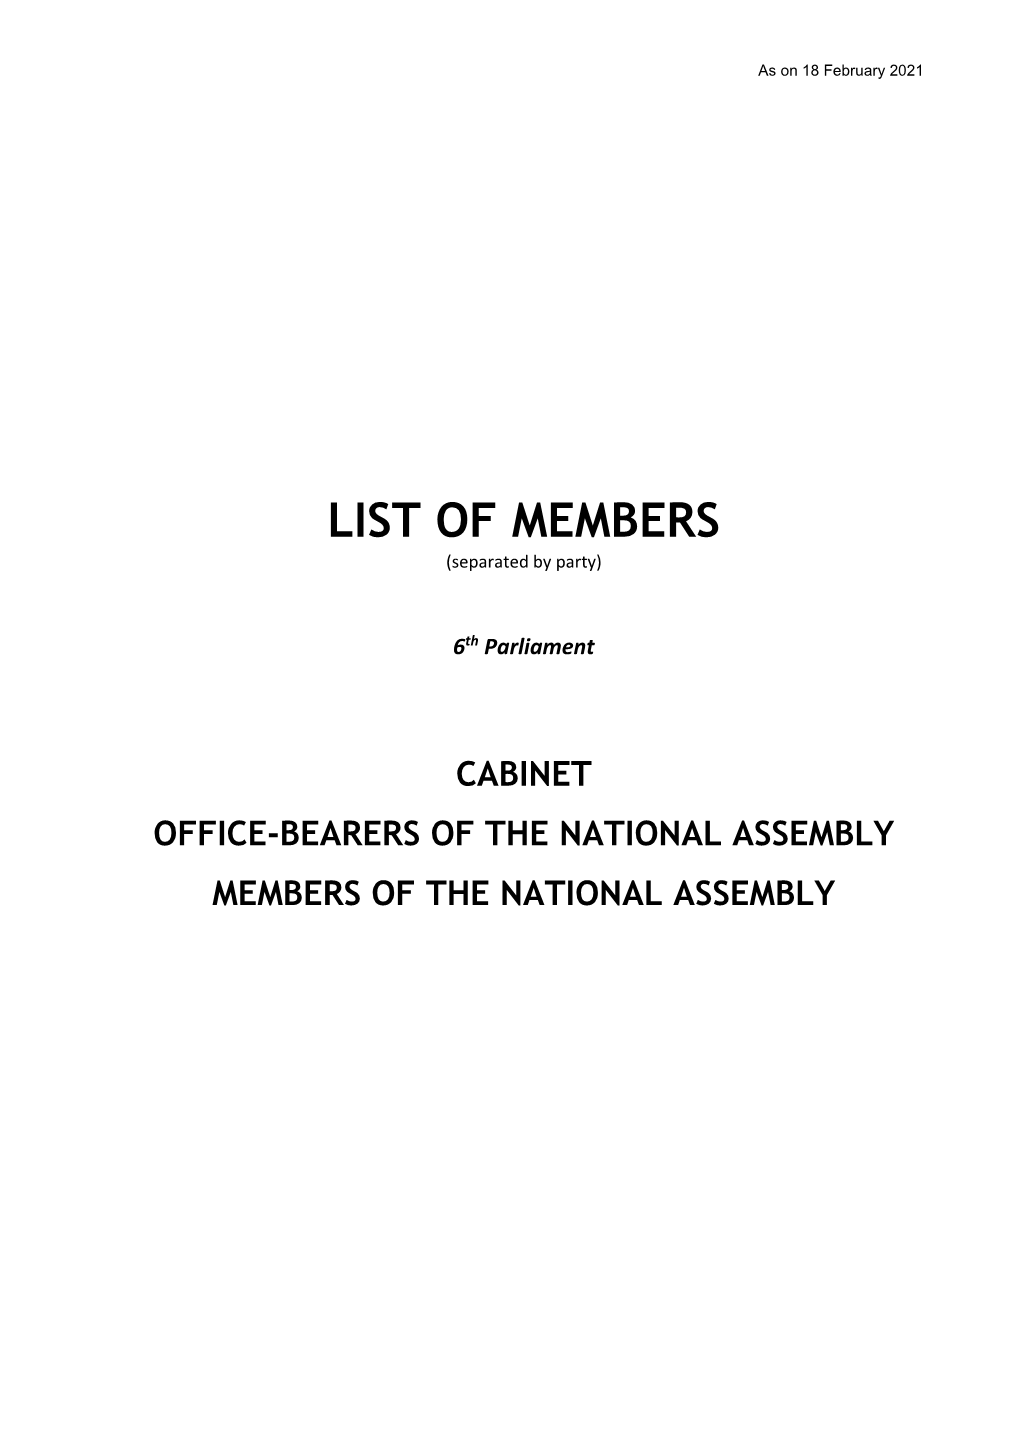 LIST of MEMBERS (Separated by Party)